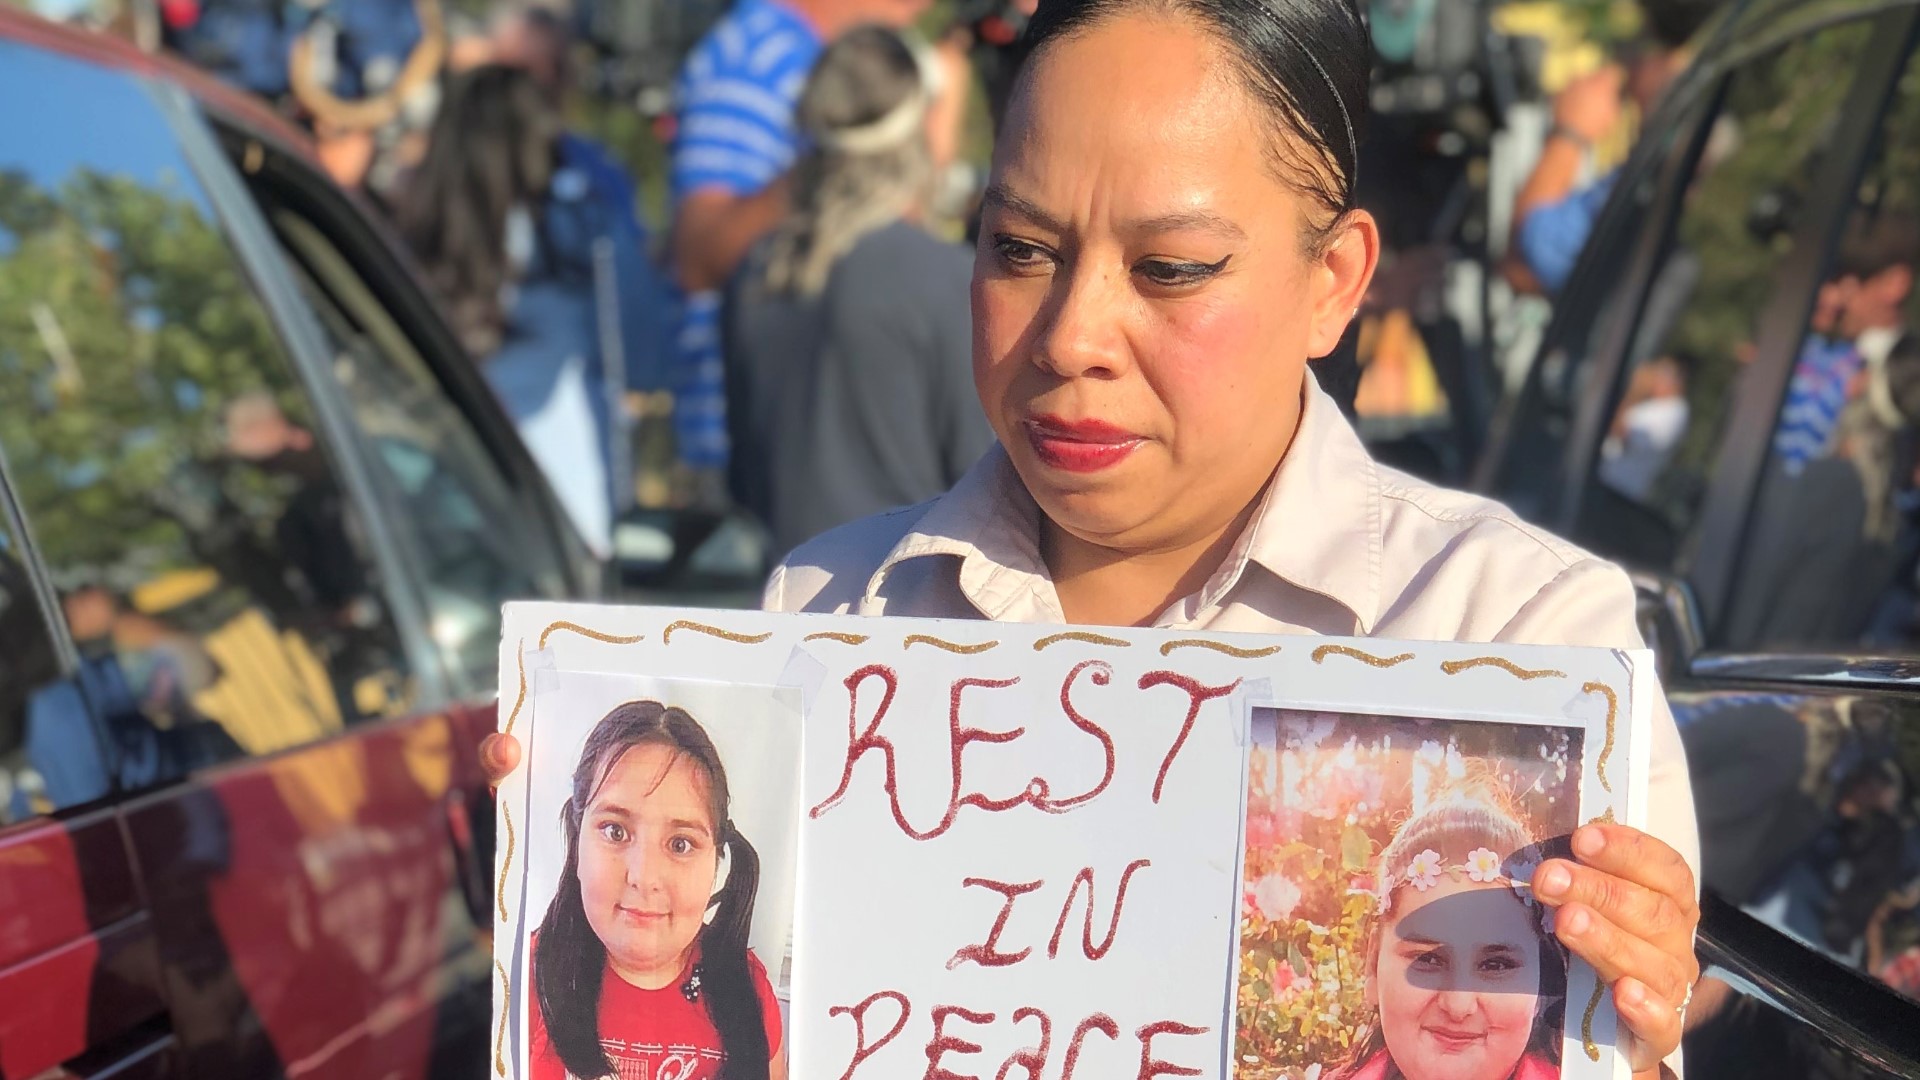 Keyla Salazar was one of the three victims killed in the Gilroy Garlic Festival shooting. On Tuesday, friends, family, and members of the community held a vigil at Ace Empower Academy in San Jose, from where Keyla graduated in June.